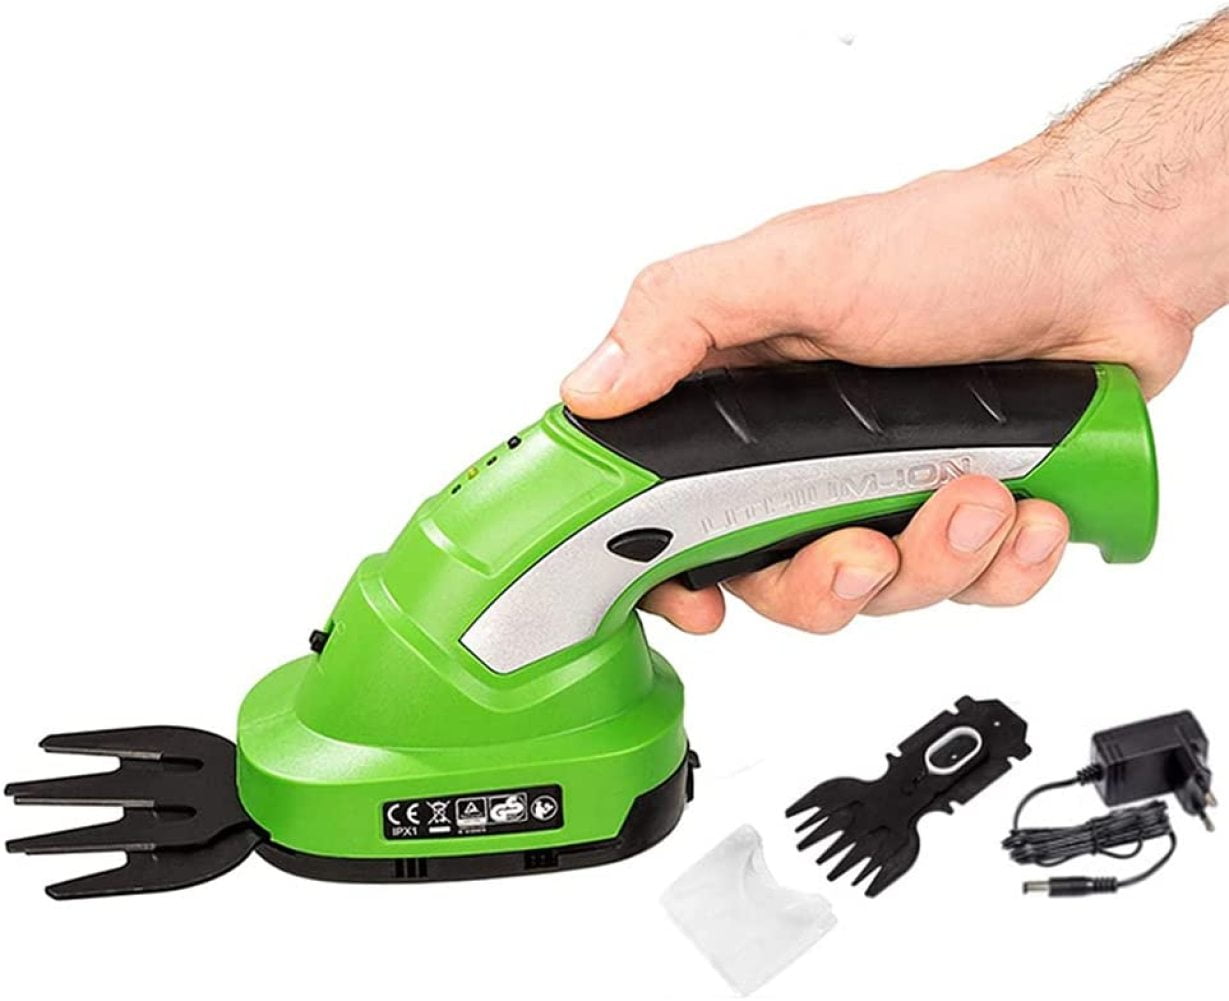 Metal Blades SereneLife PSLTLL1812 Electric Cordless Handheld Garden Shears with 3.6V Rechargeable Battery Light Yellow Pack of 4 